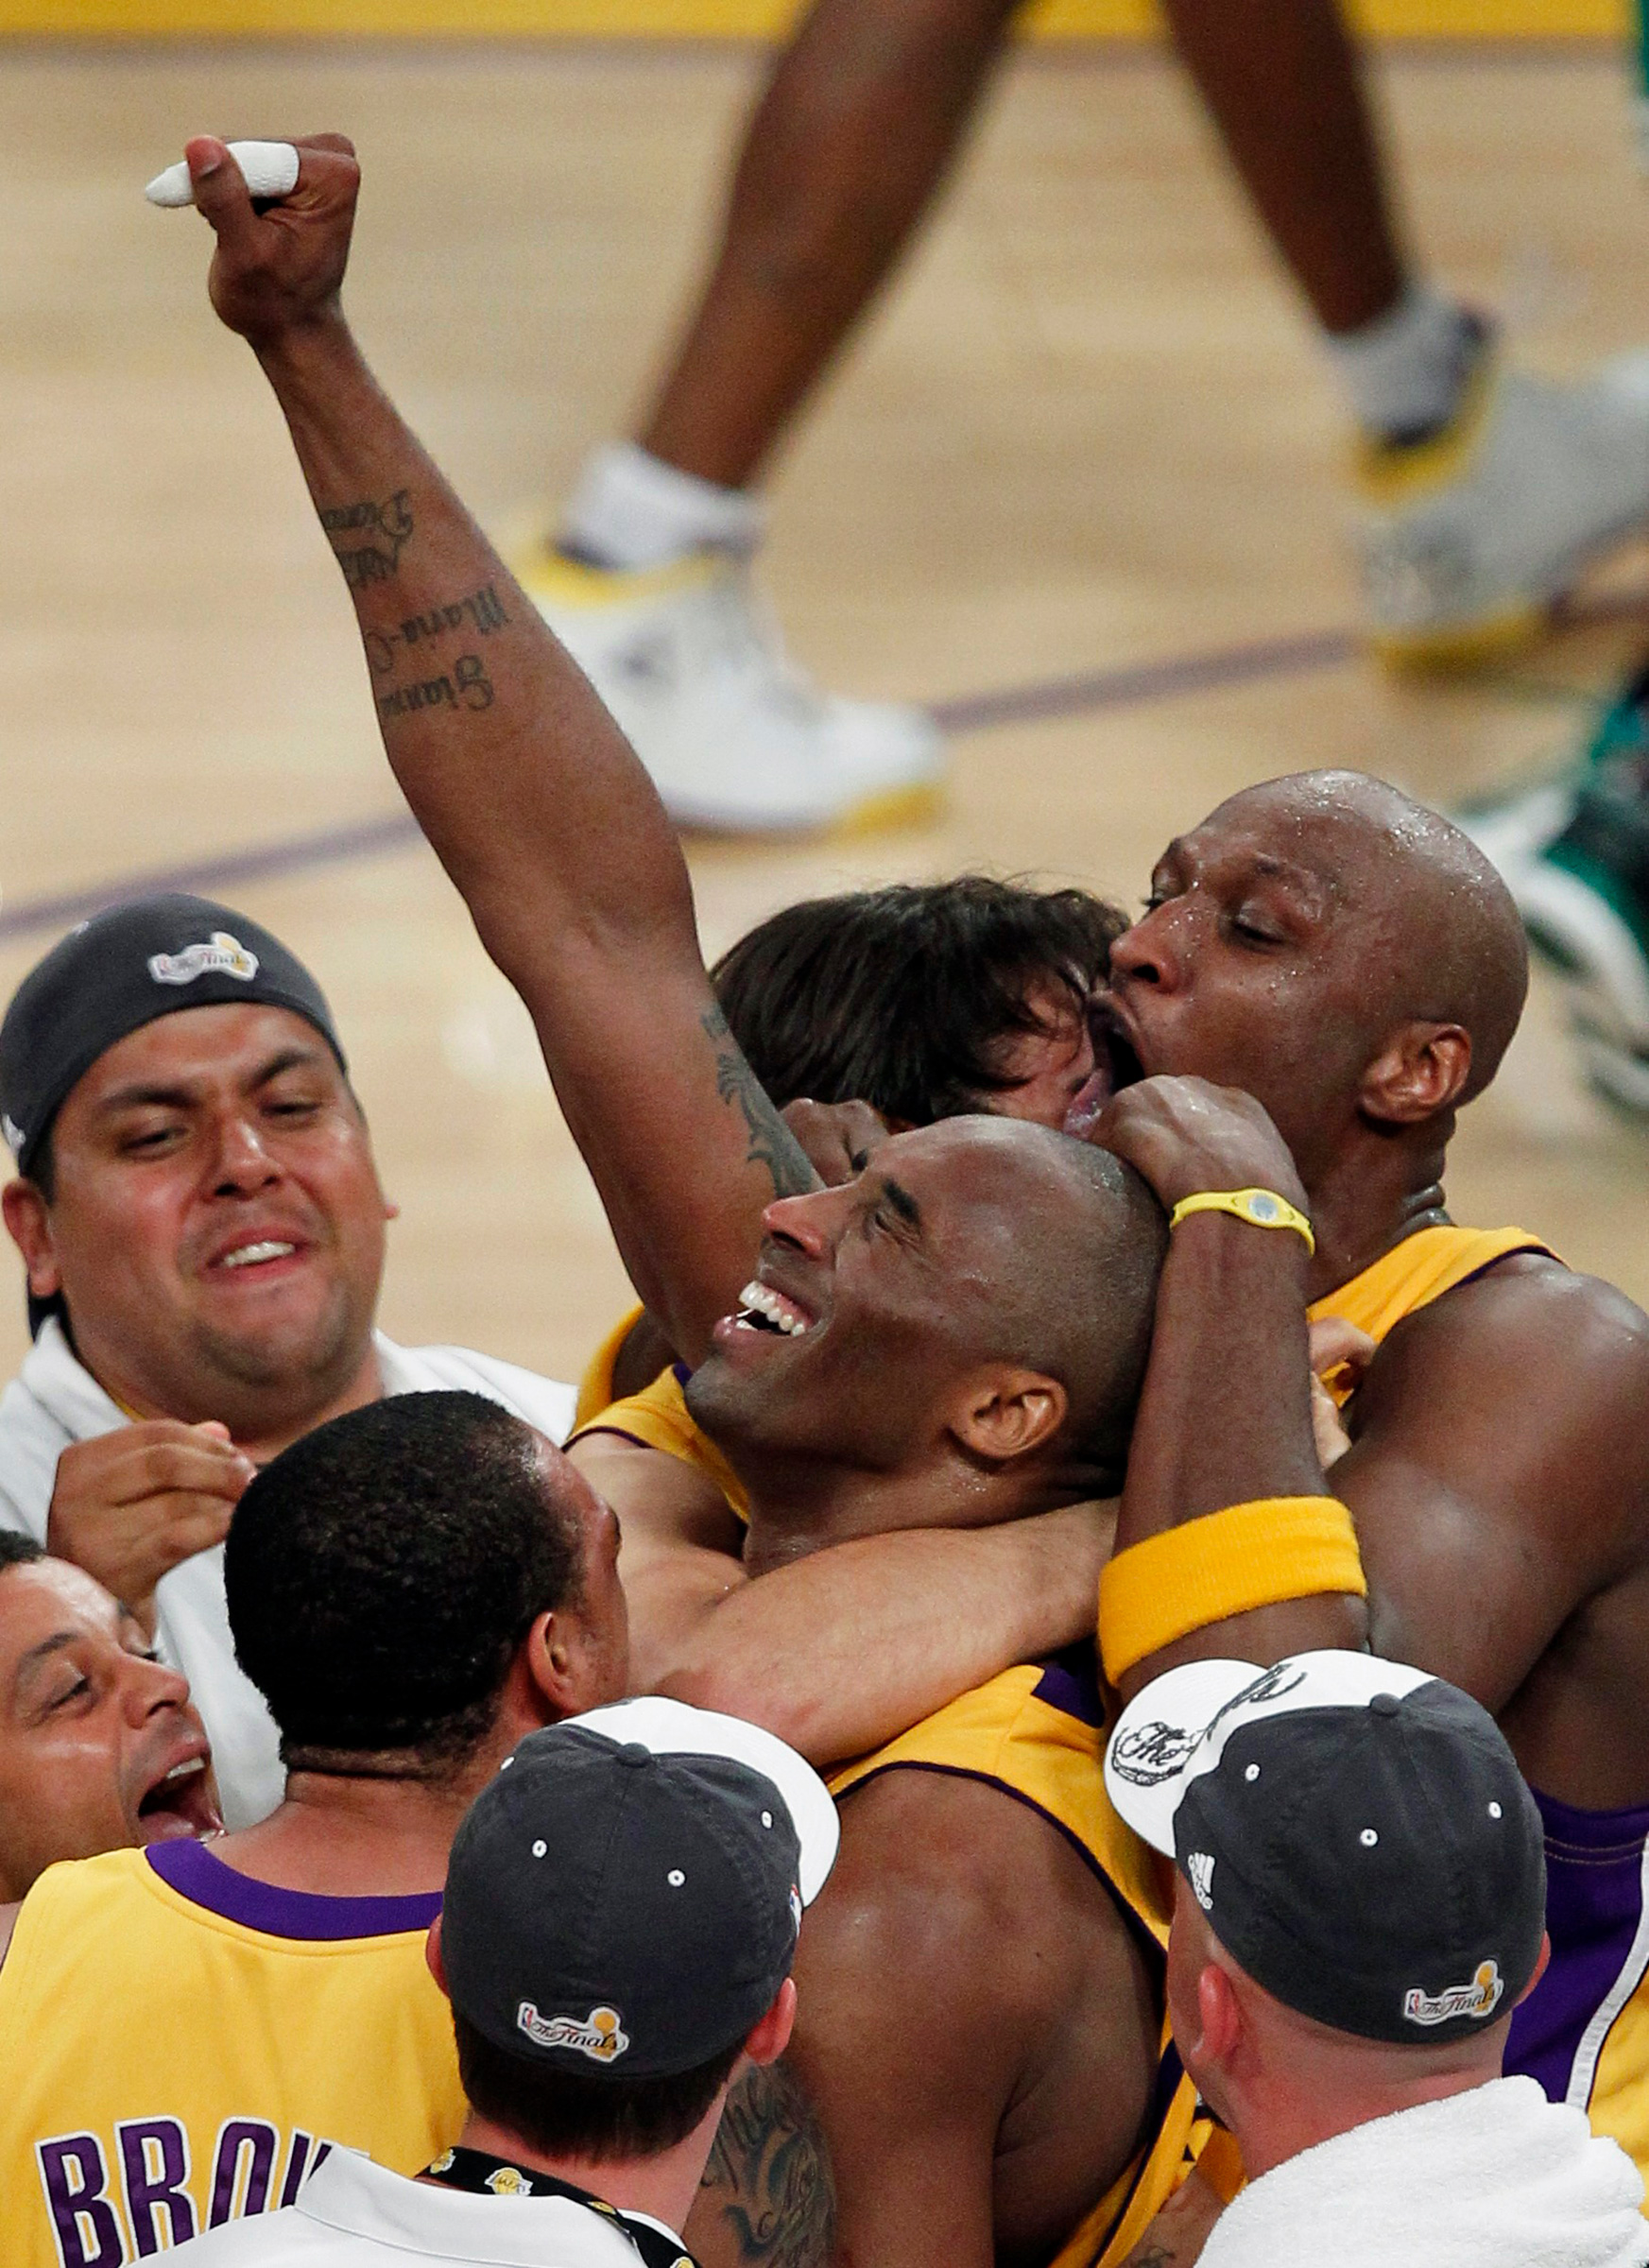 Bryant celebrates the 2010 NBA championship, after the Lakers defeated the Boston Celtics in Game 7 (Alex Gallardo—Reuters)